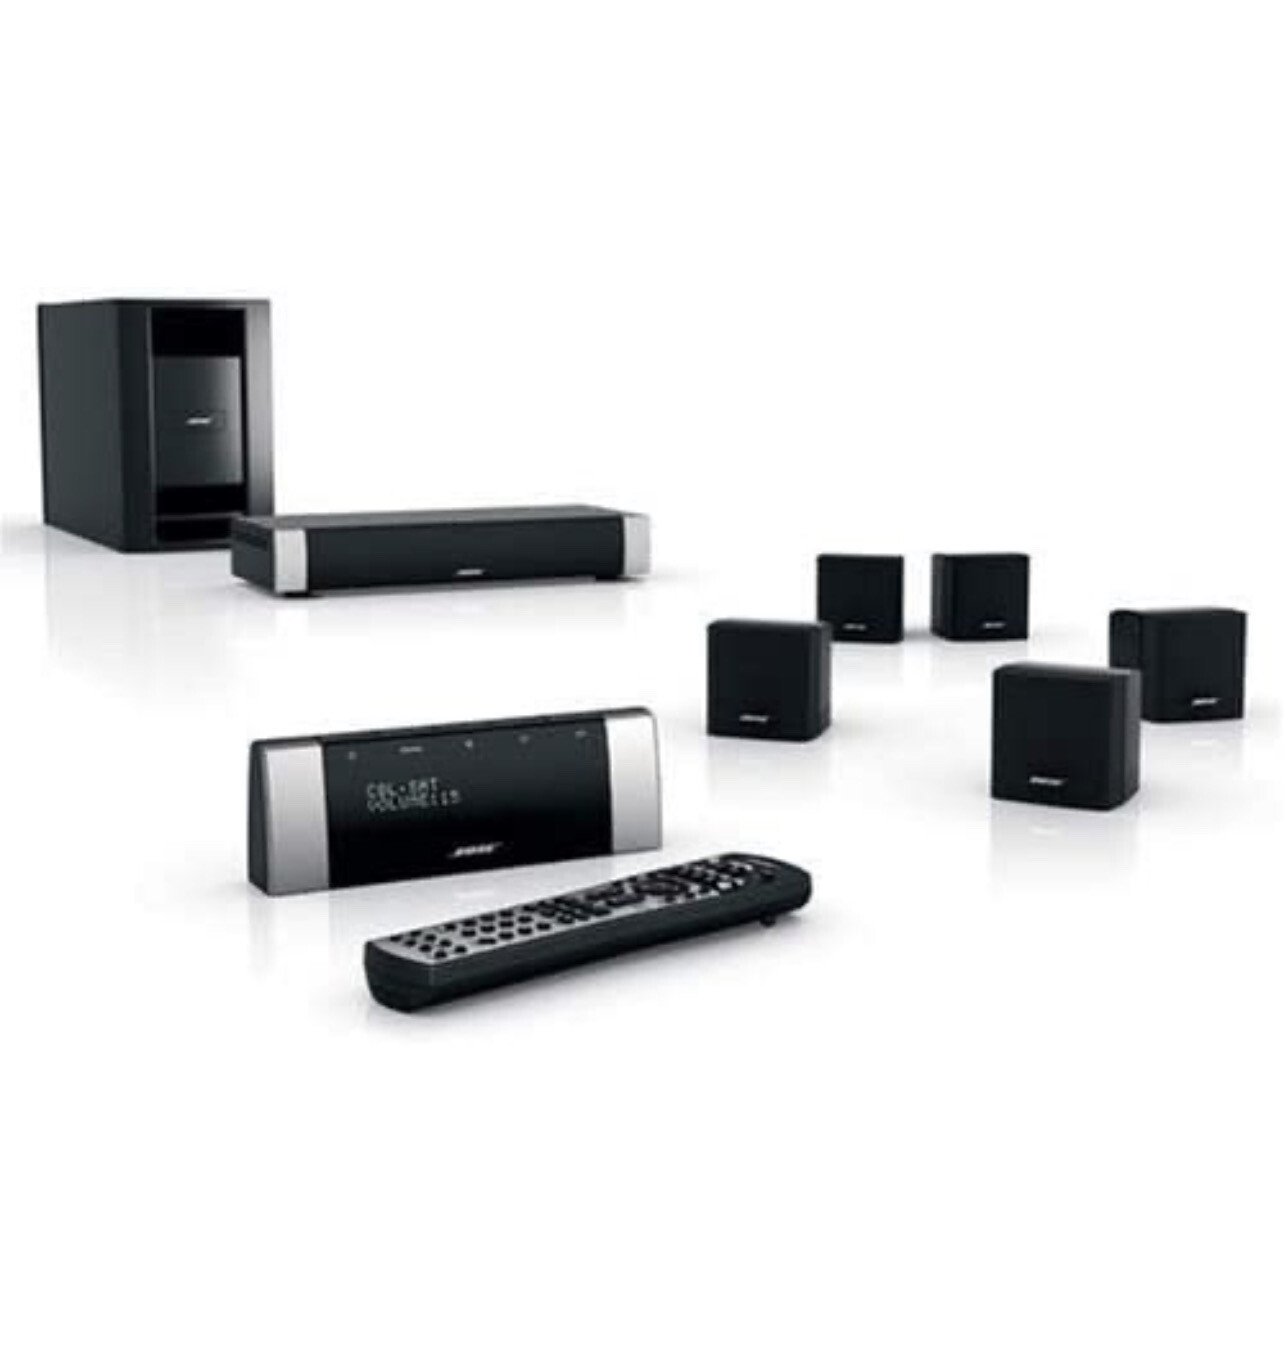 Bose Lifestyle V10 Home Theater System - Black